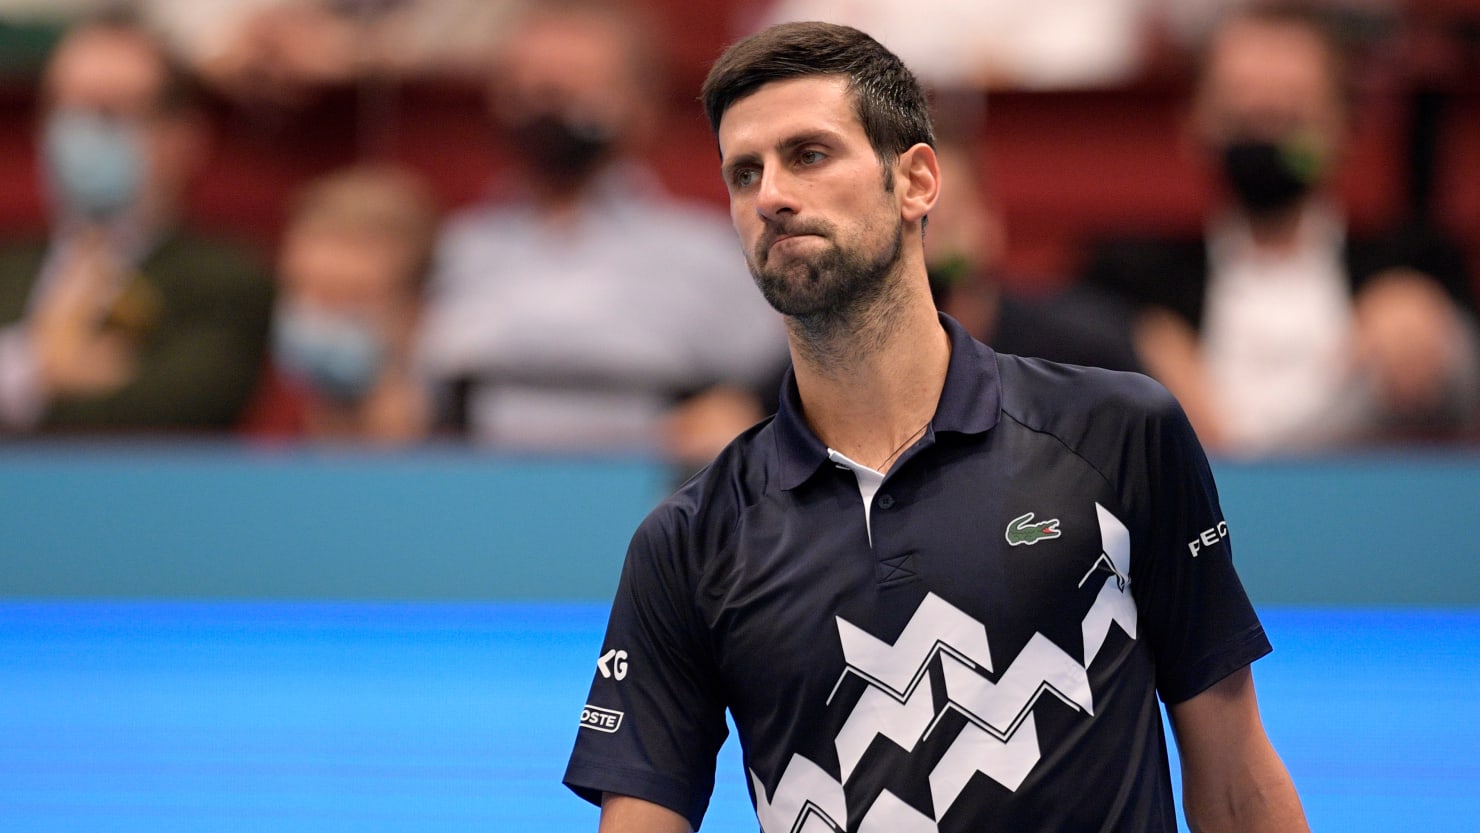 Djokovic’s Aussie Court Hearing Hit With Technical Difficulties Zoom Bomber – The Daily Beast